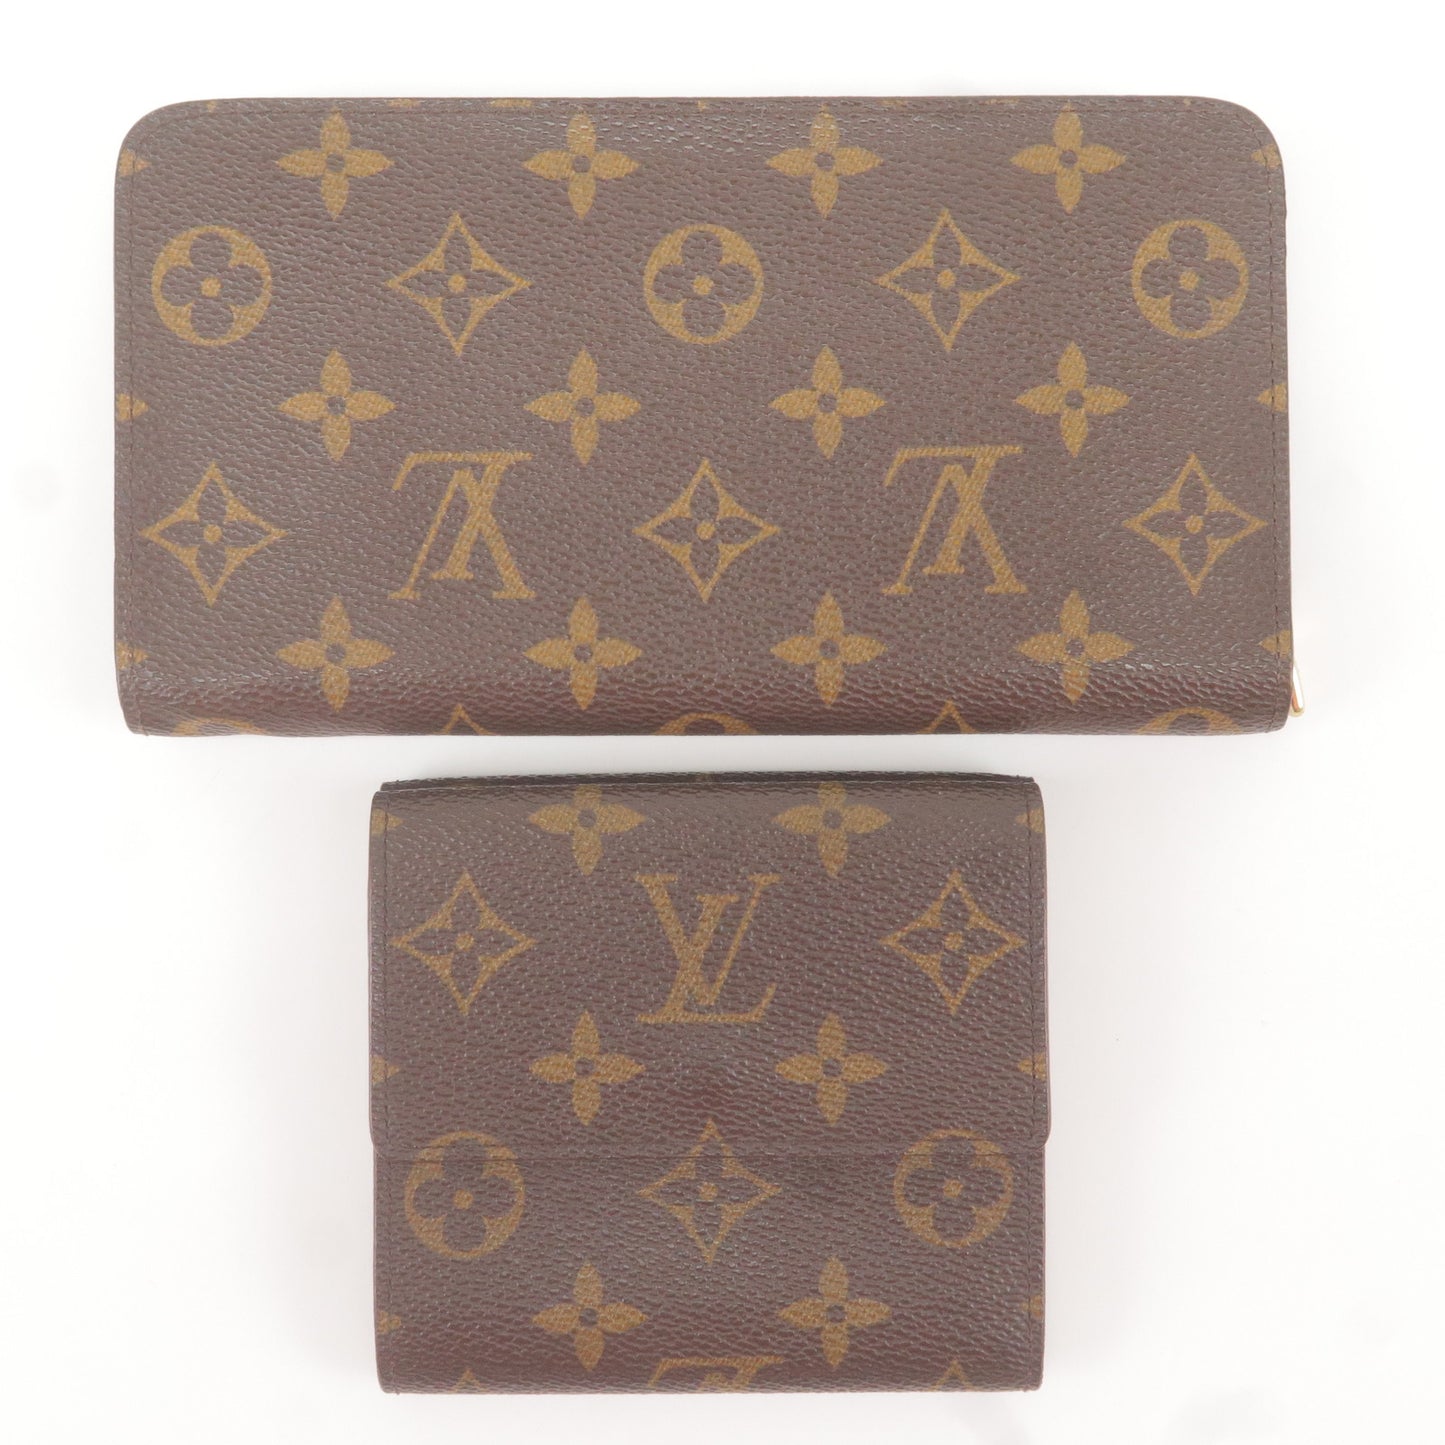 Leather and Monogram canvas set, wallet containing plast…